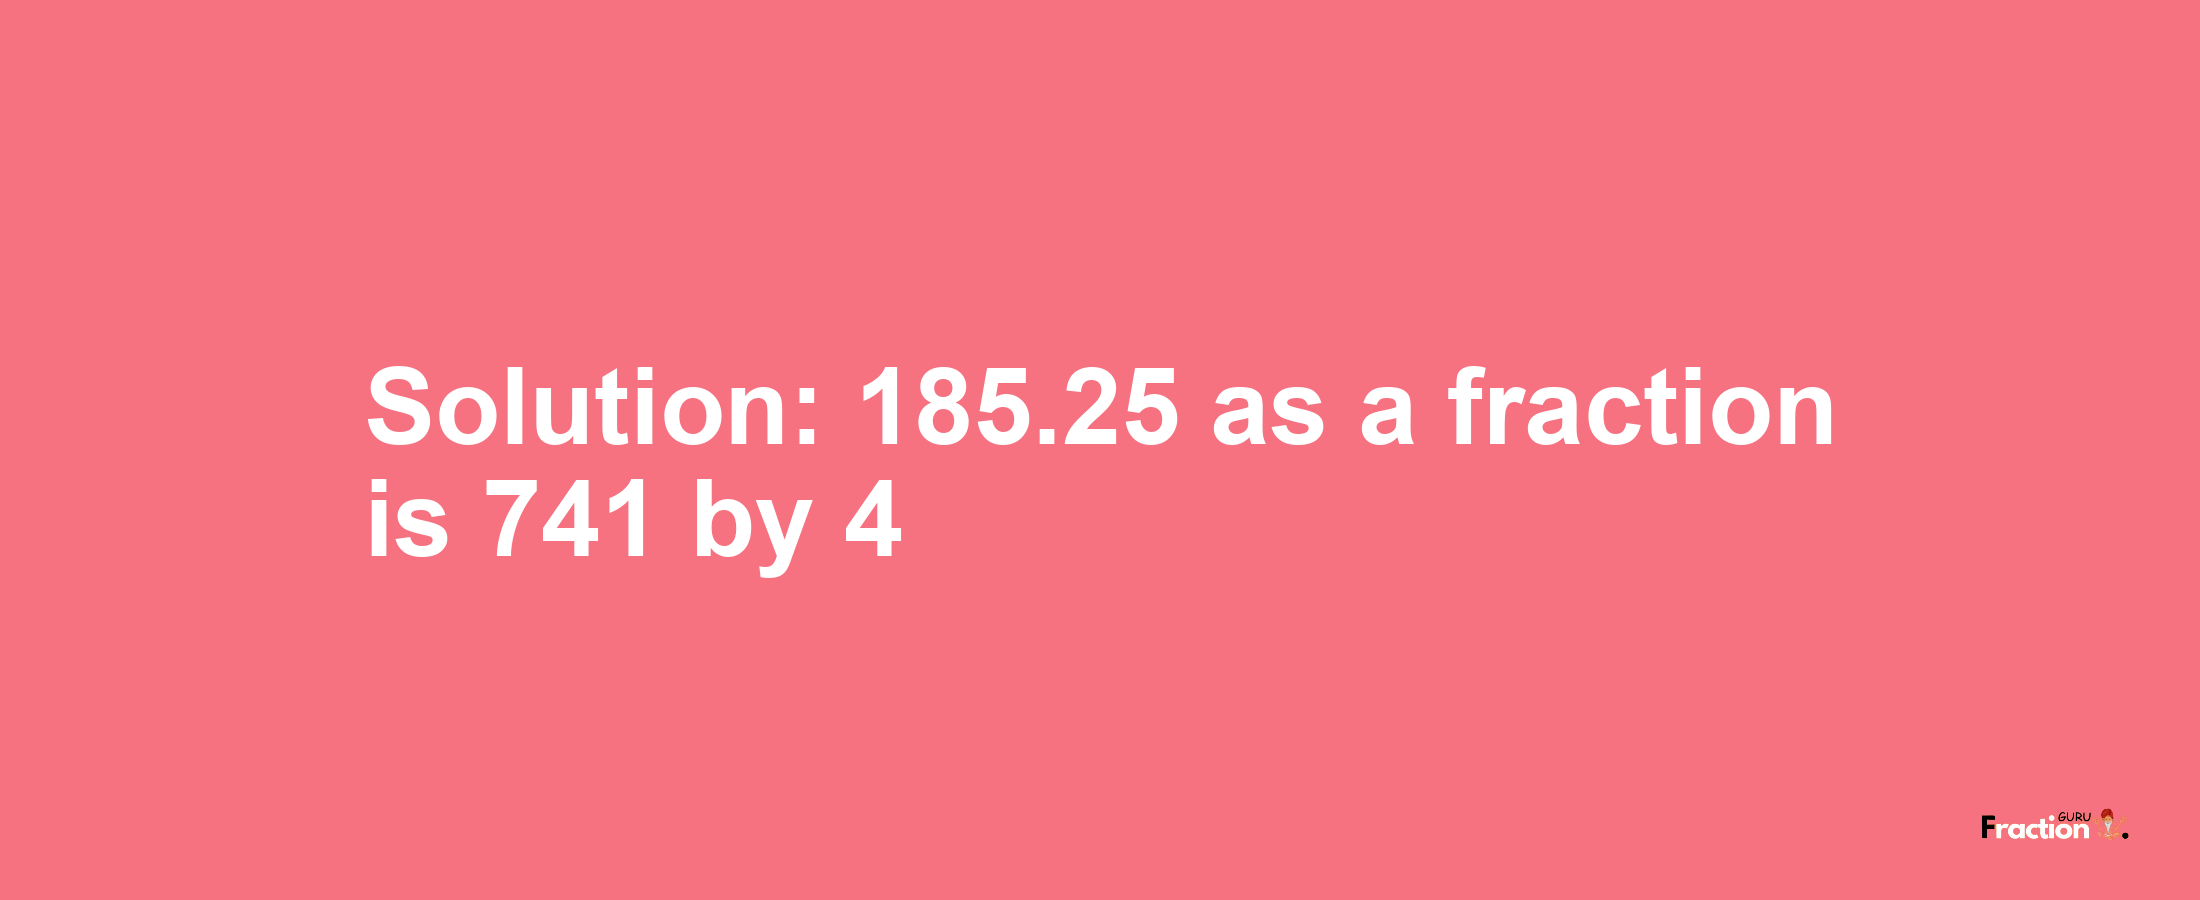 Solution:185.25 as a fraction is 741/4